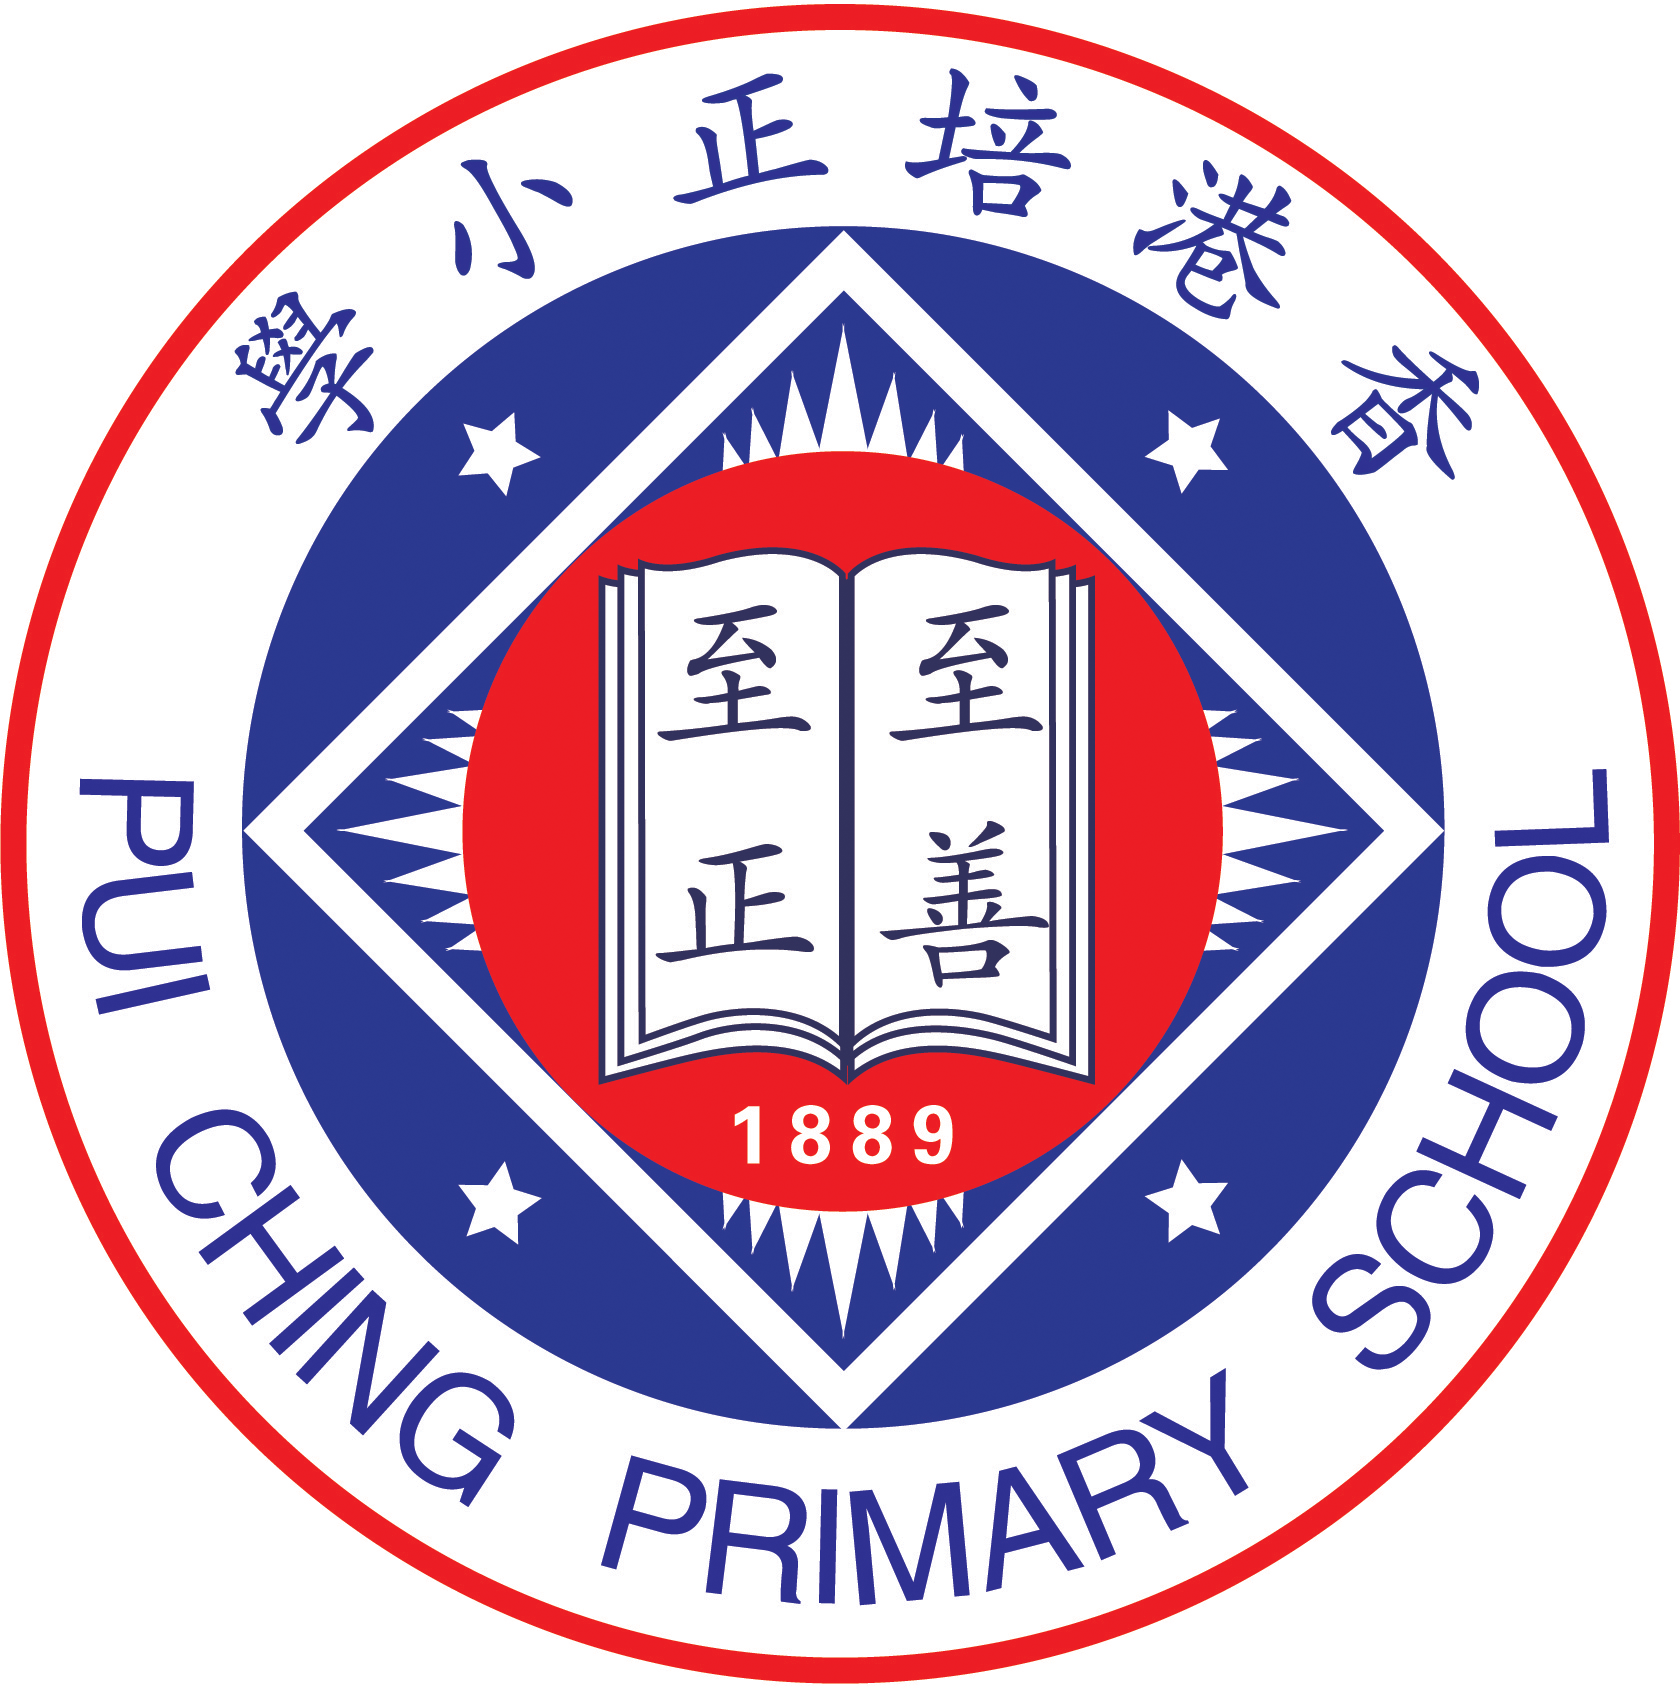 The Pui Ching Blog